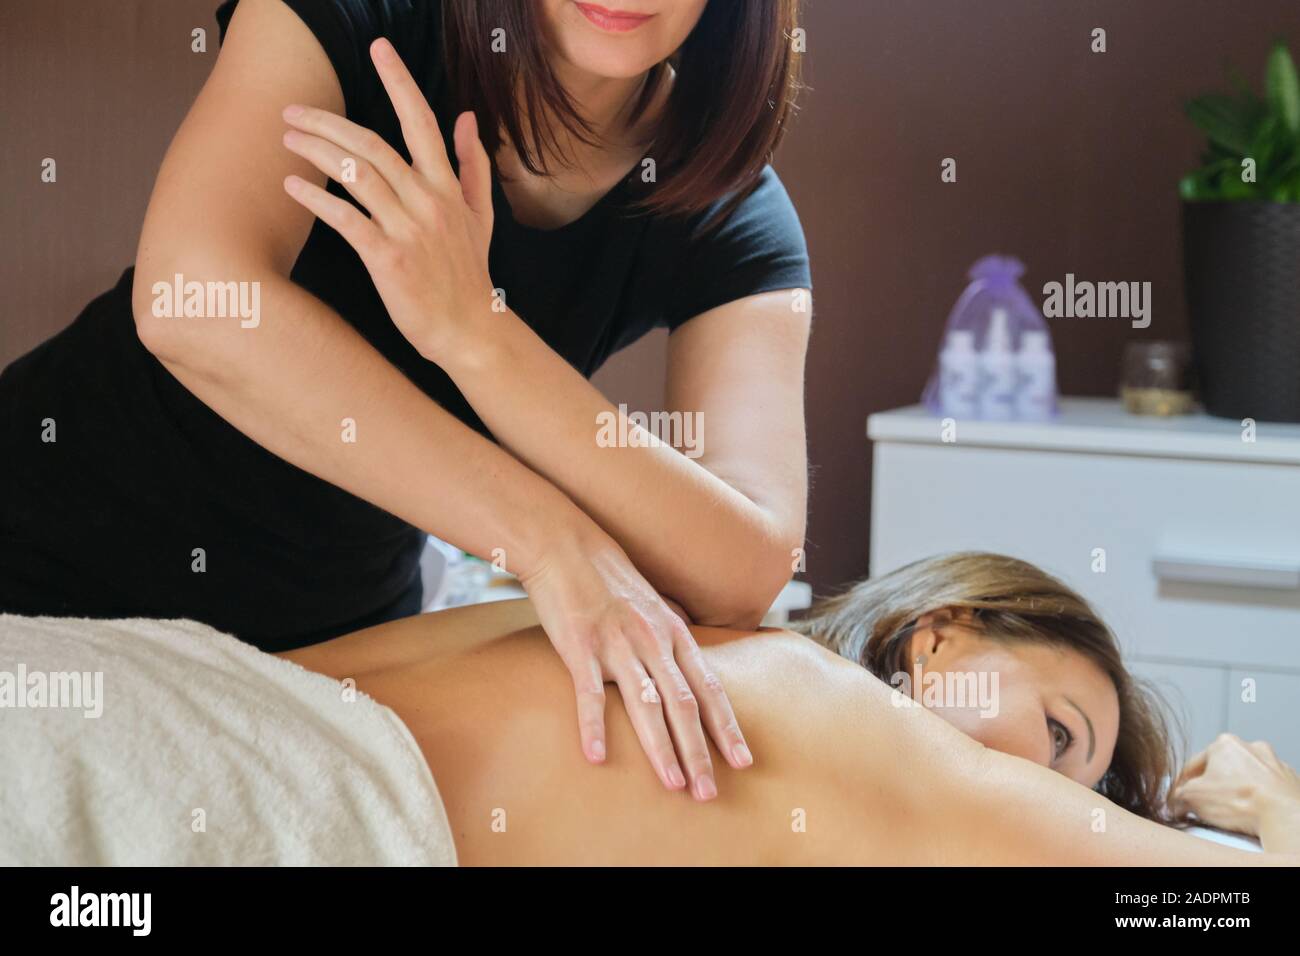 Mature woman lying on massage table and receiving medical back massage Stock Photo